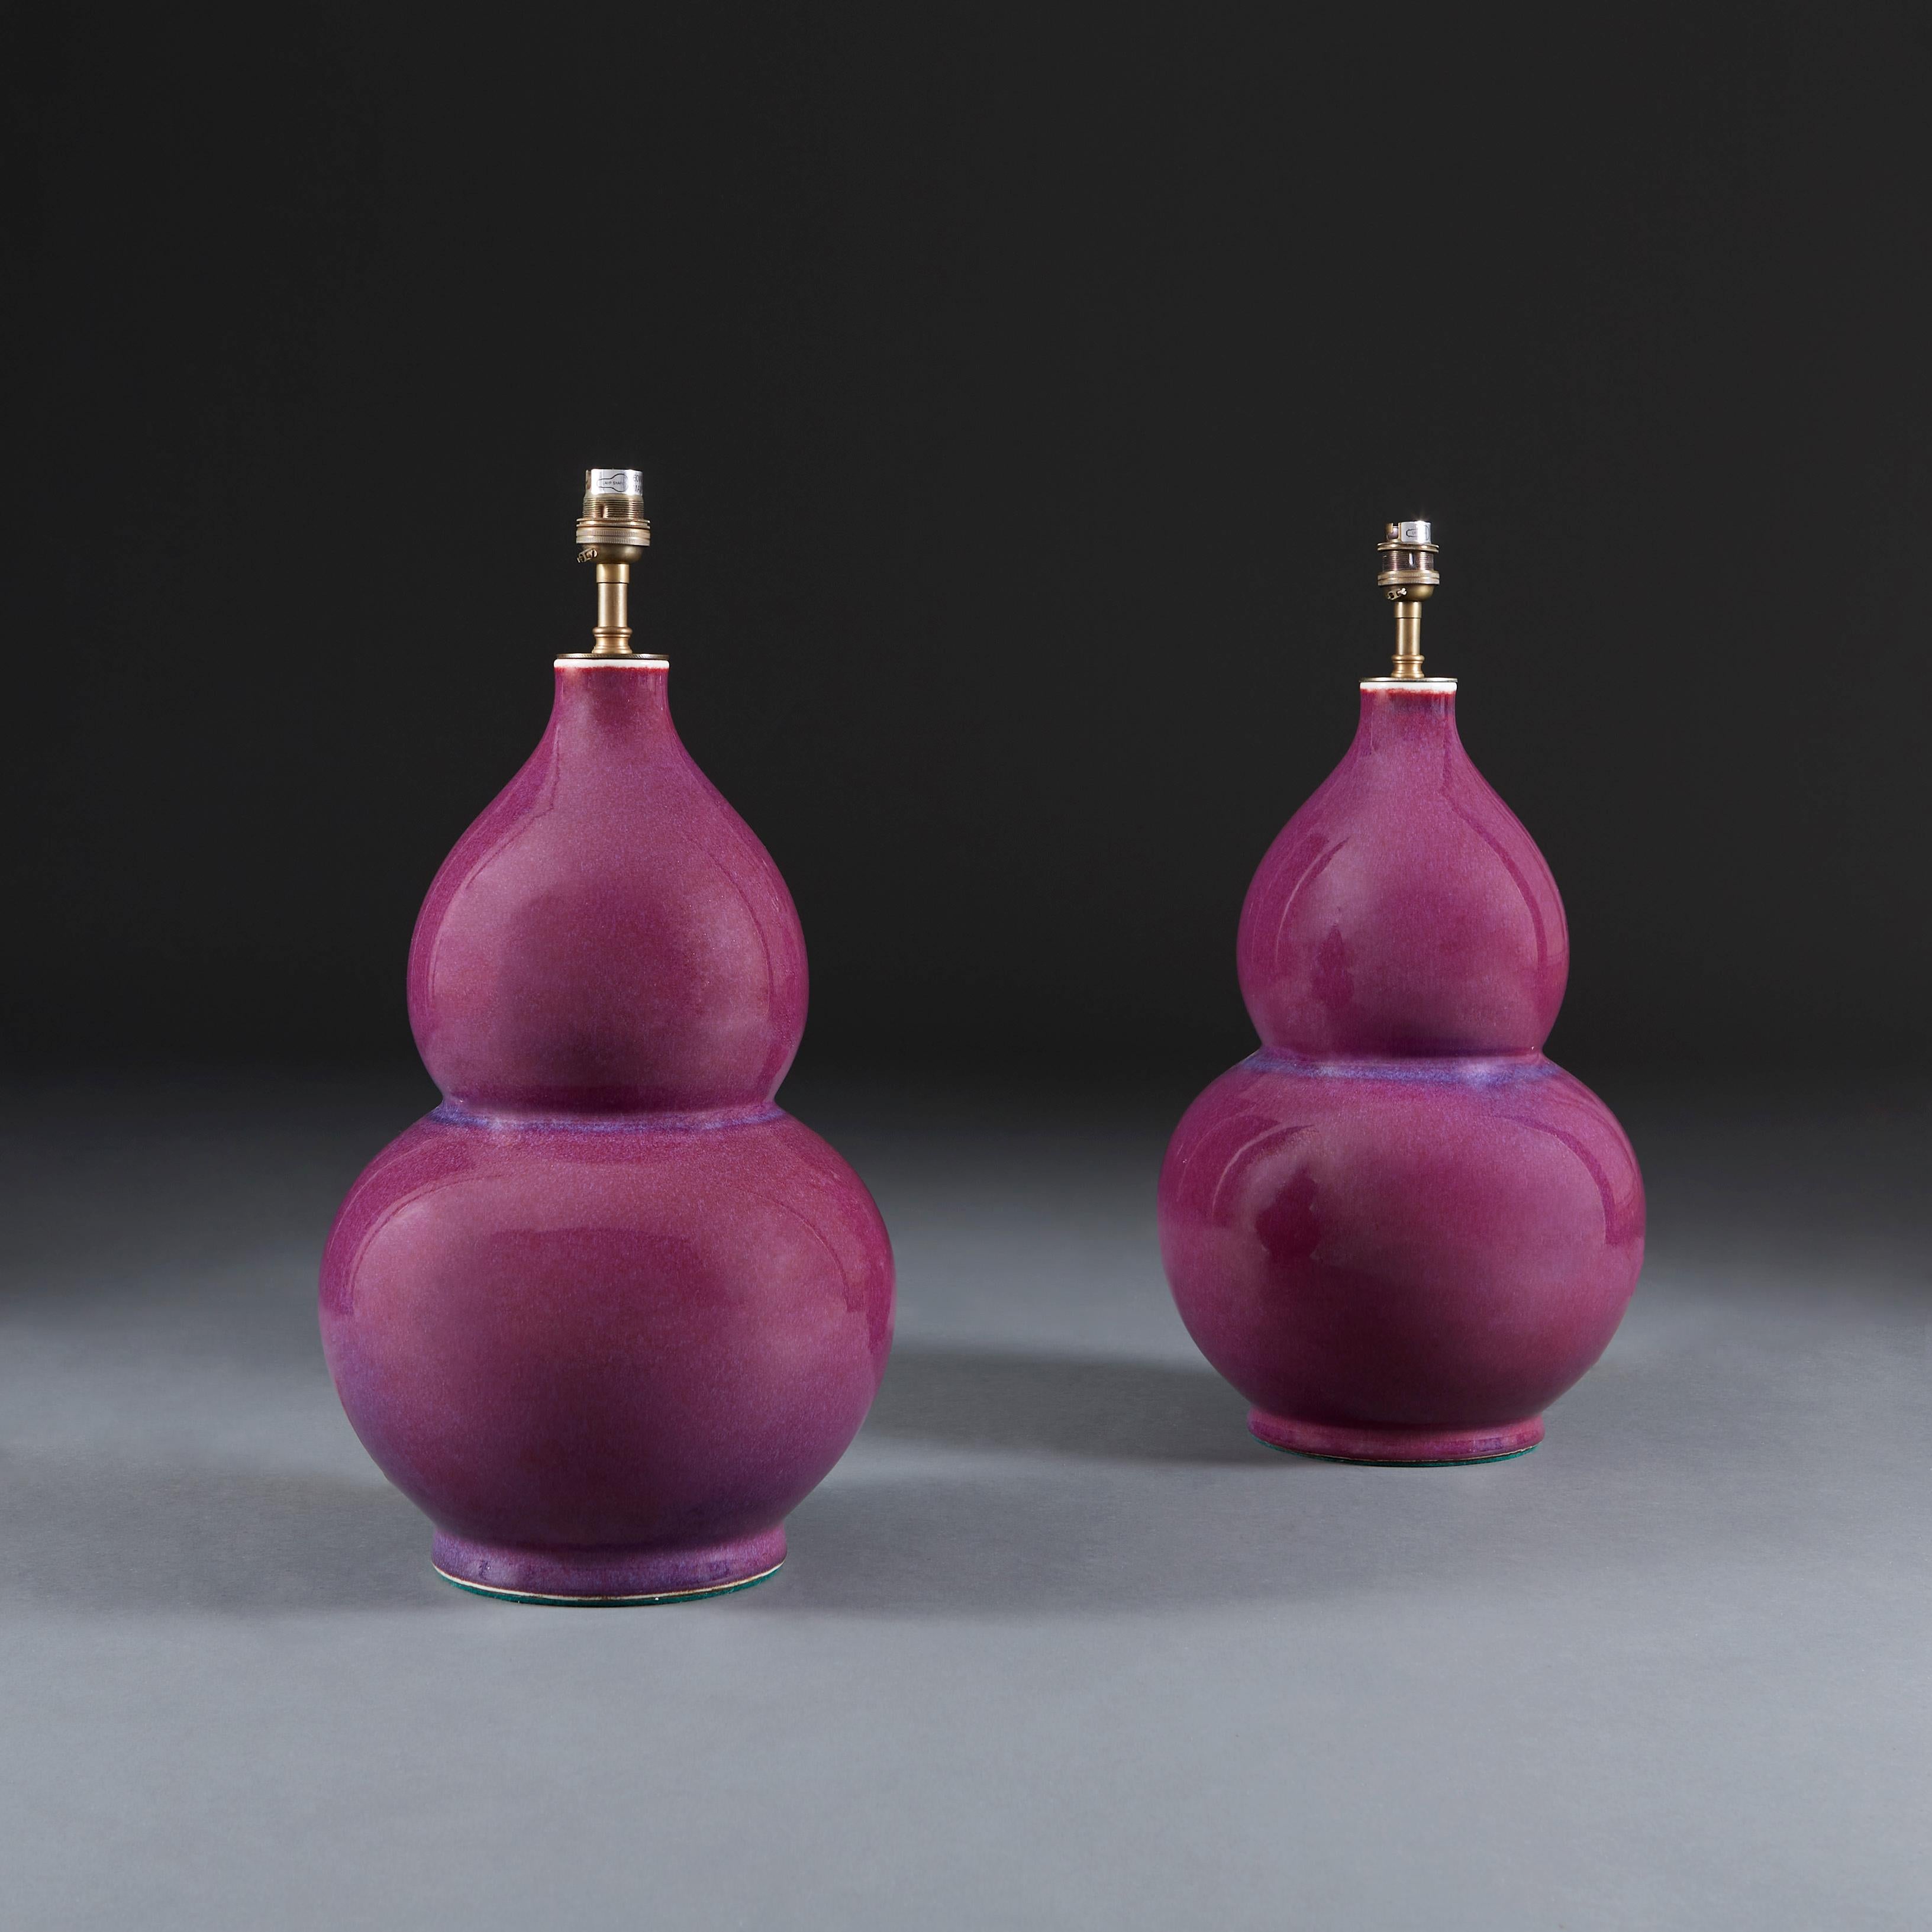 A pair of 20th century Chinese monochrome lamps with strong purple glaze with blue flecks throughout, of double gourd form.

Please note: lampshades not included.

Currently wired for the UK.